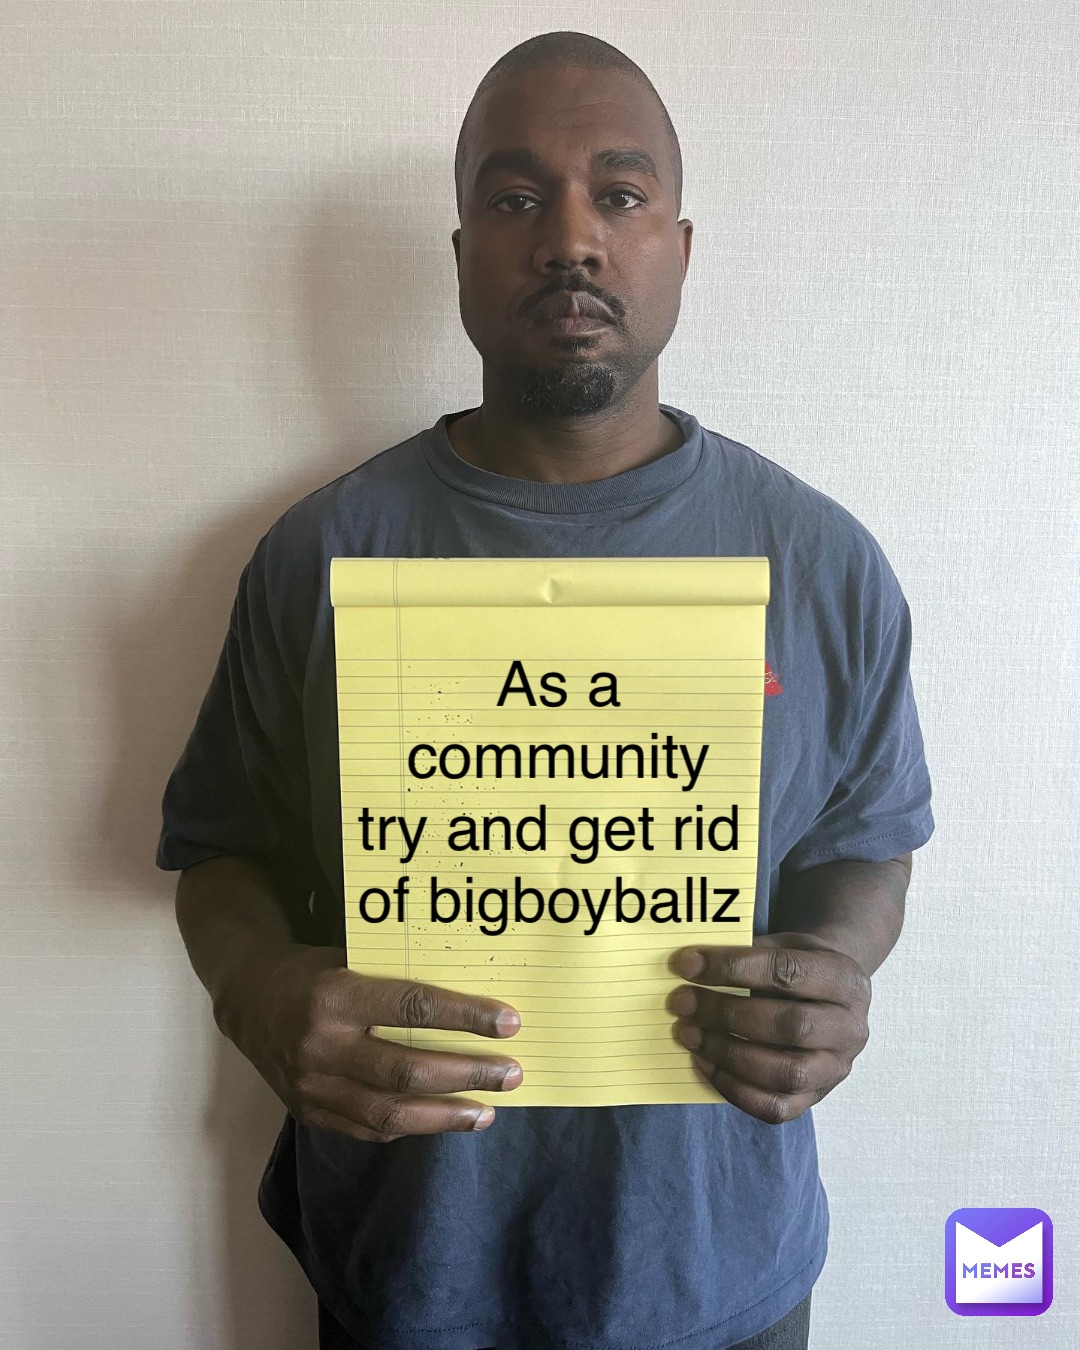 As a community try and get rid of bigboyballz